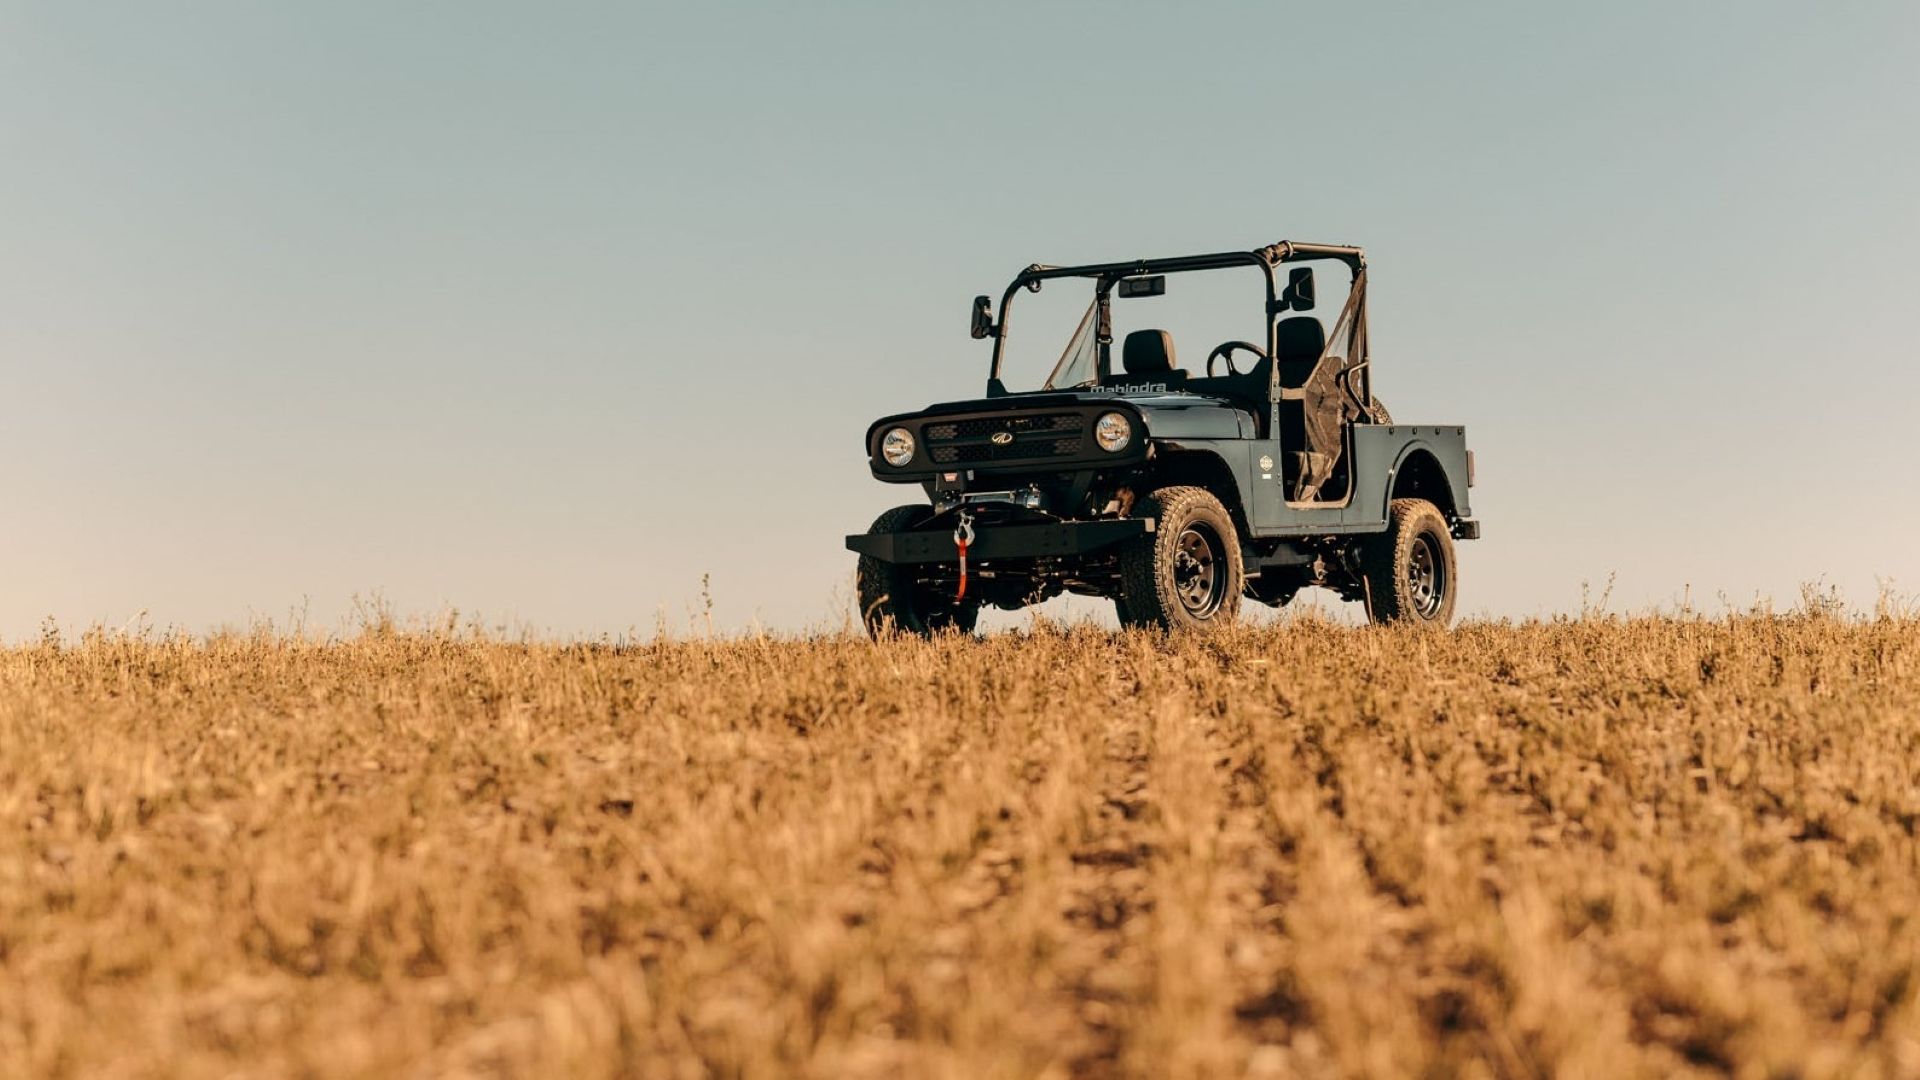 Front 3/4 shot of the Mahindra Roxor in a field